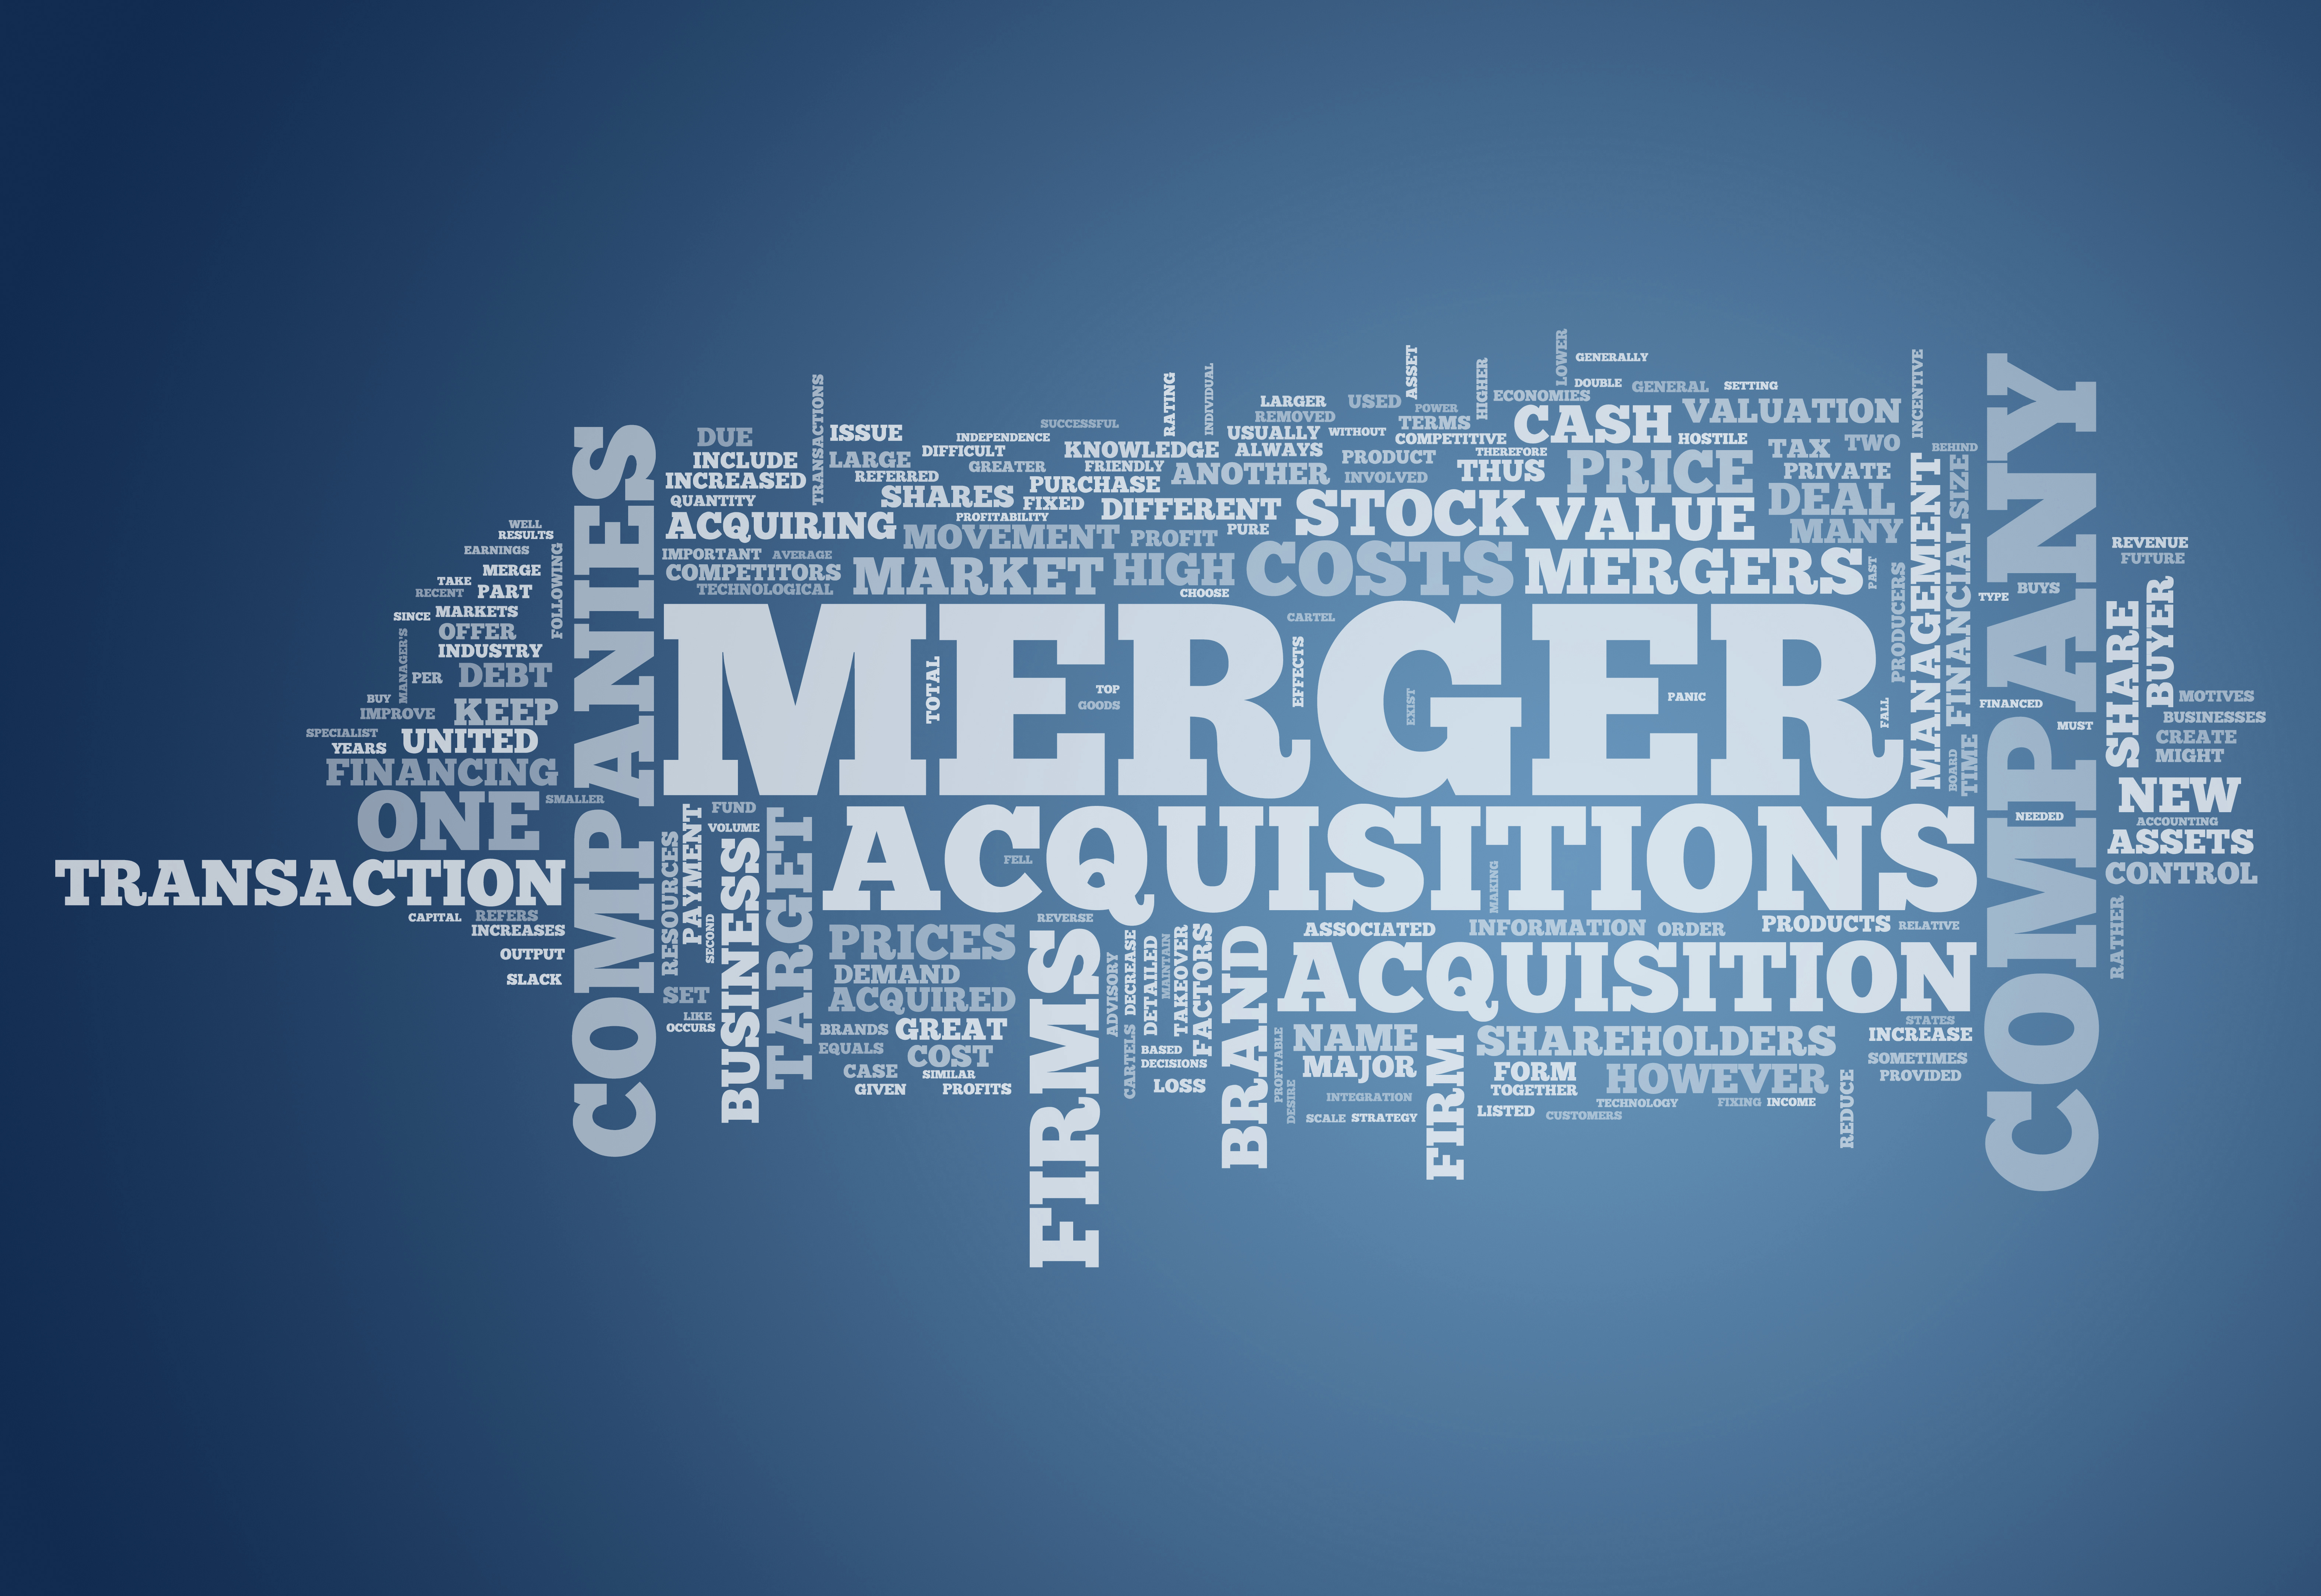 mergers-and-acquisitions